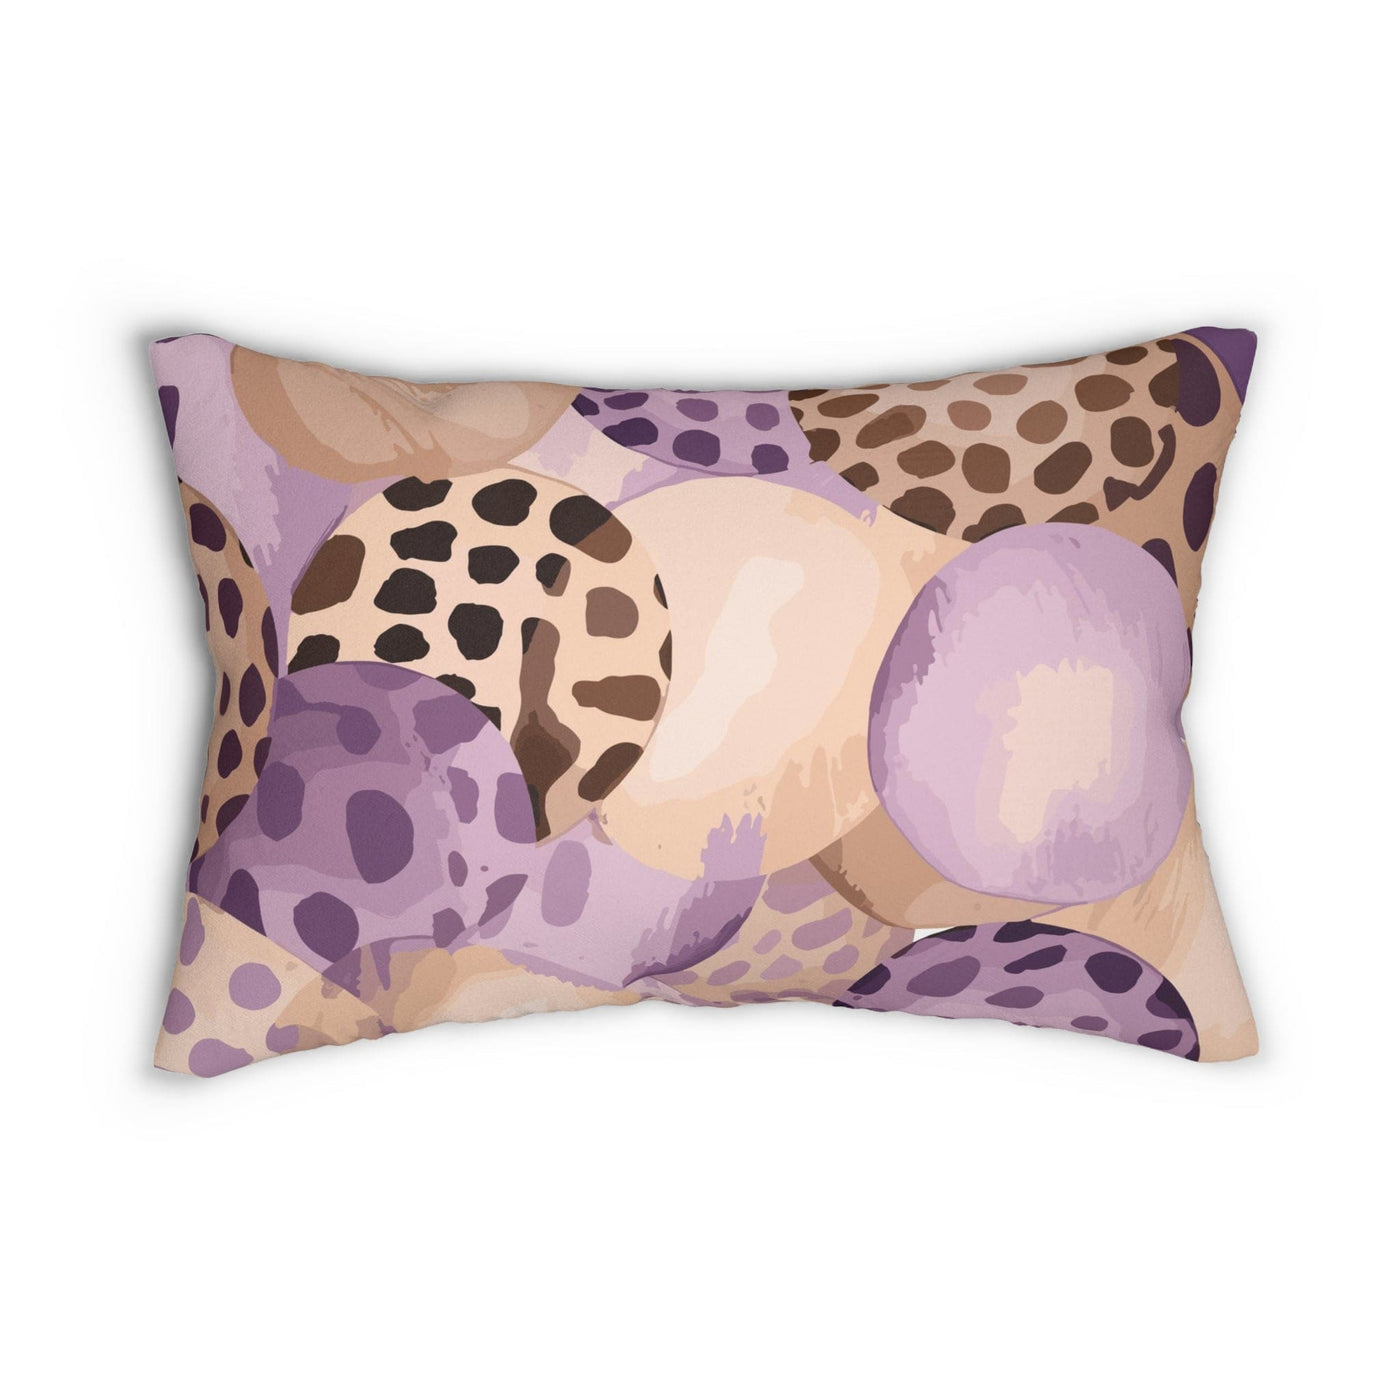 Lumbar Pillow Purple Lavender And Brown Spotted Illustration - Home Decor